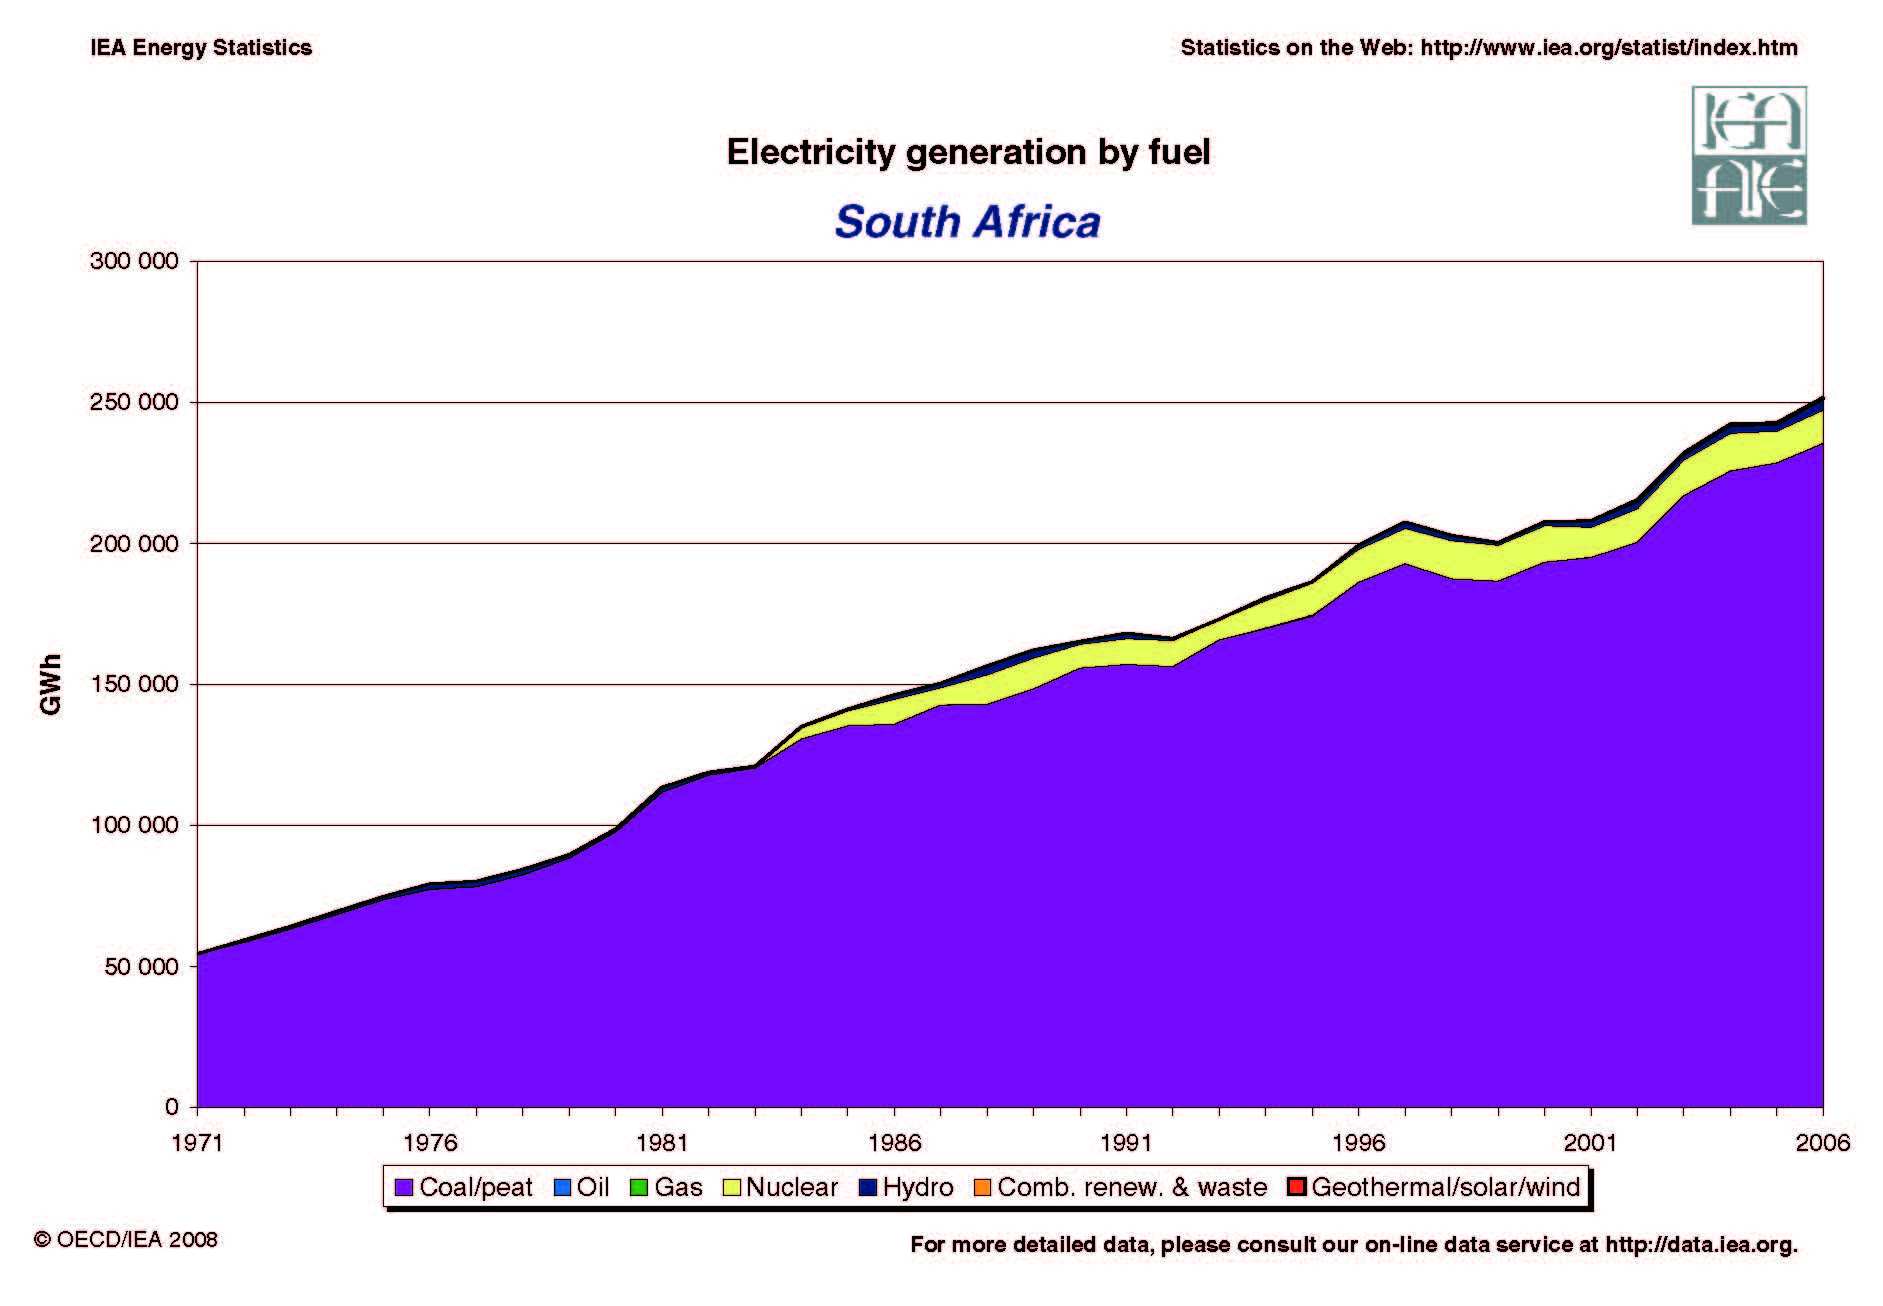 South Africa Evolution of Electricity Generation by Fuel 1971 - 2006